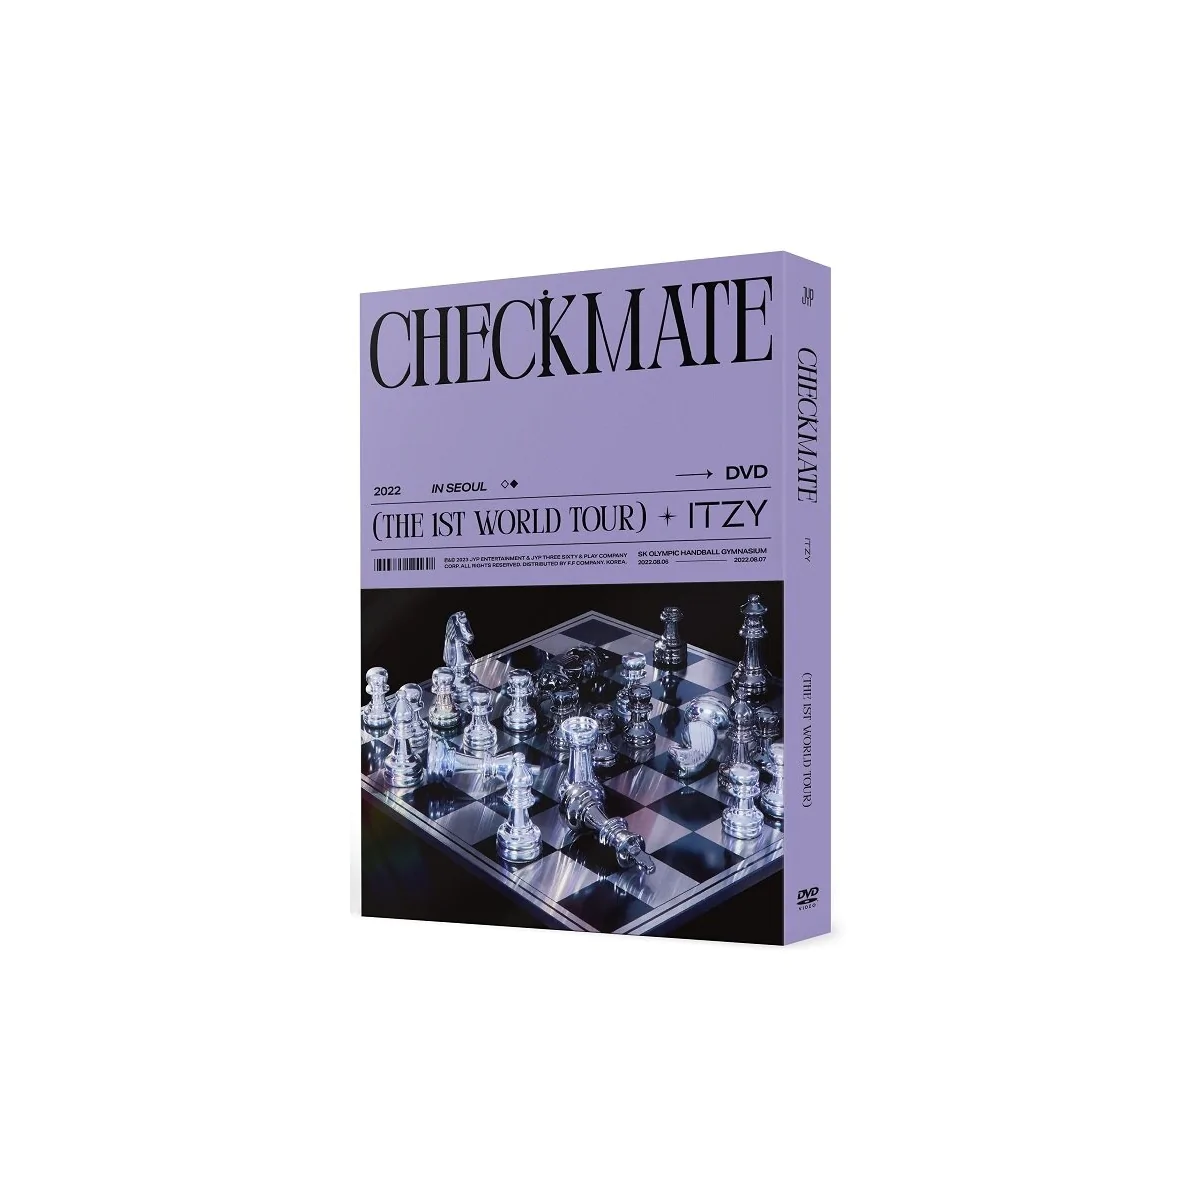 ITZY - 2022 ITZY THE 1ST WORLD TOUR 'CHECKMATE' DVD 